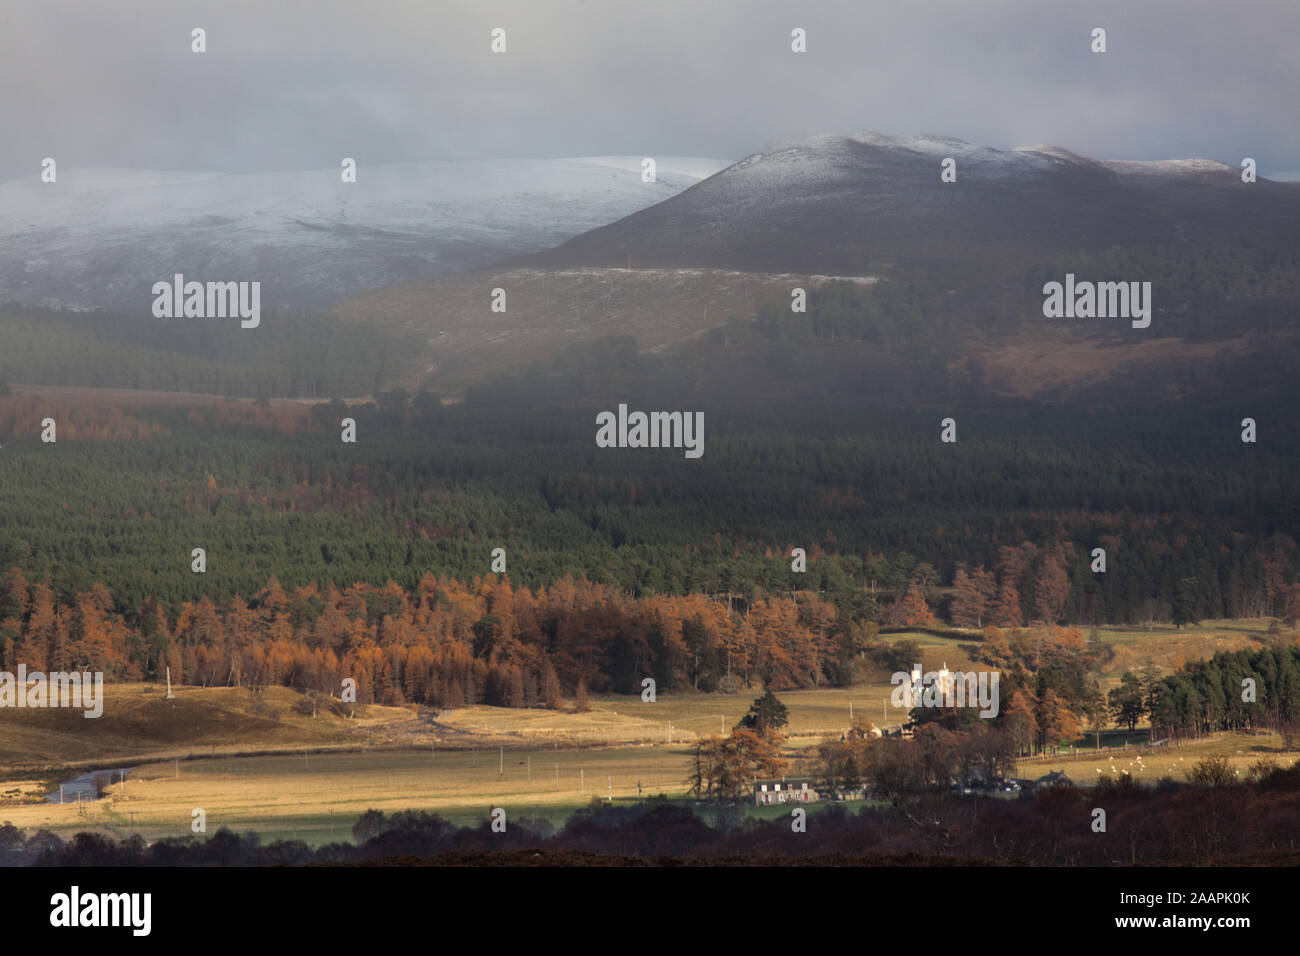 Area of Braemar, Scotland. Picturesque winter view of snow approaching the Cairngorm Mountains, near the village of Braemar. Stock Photo